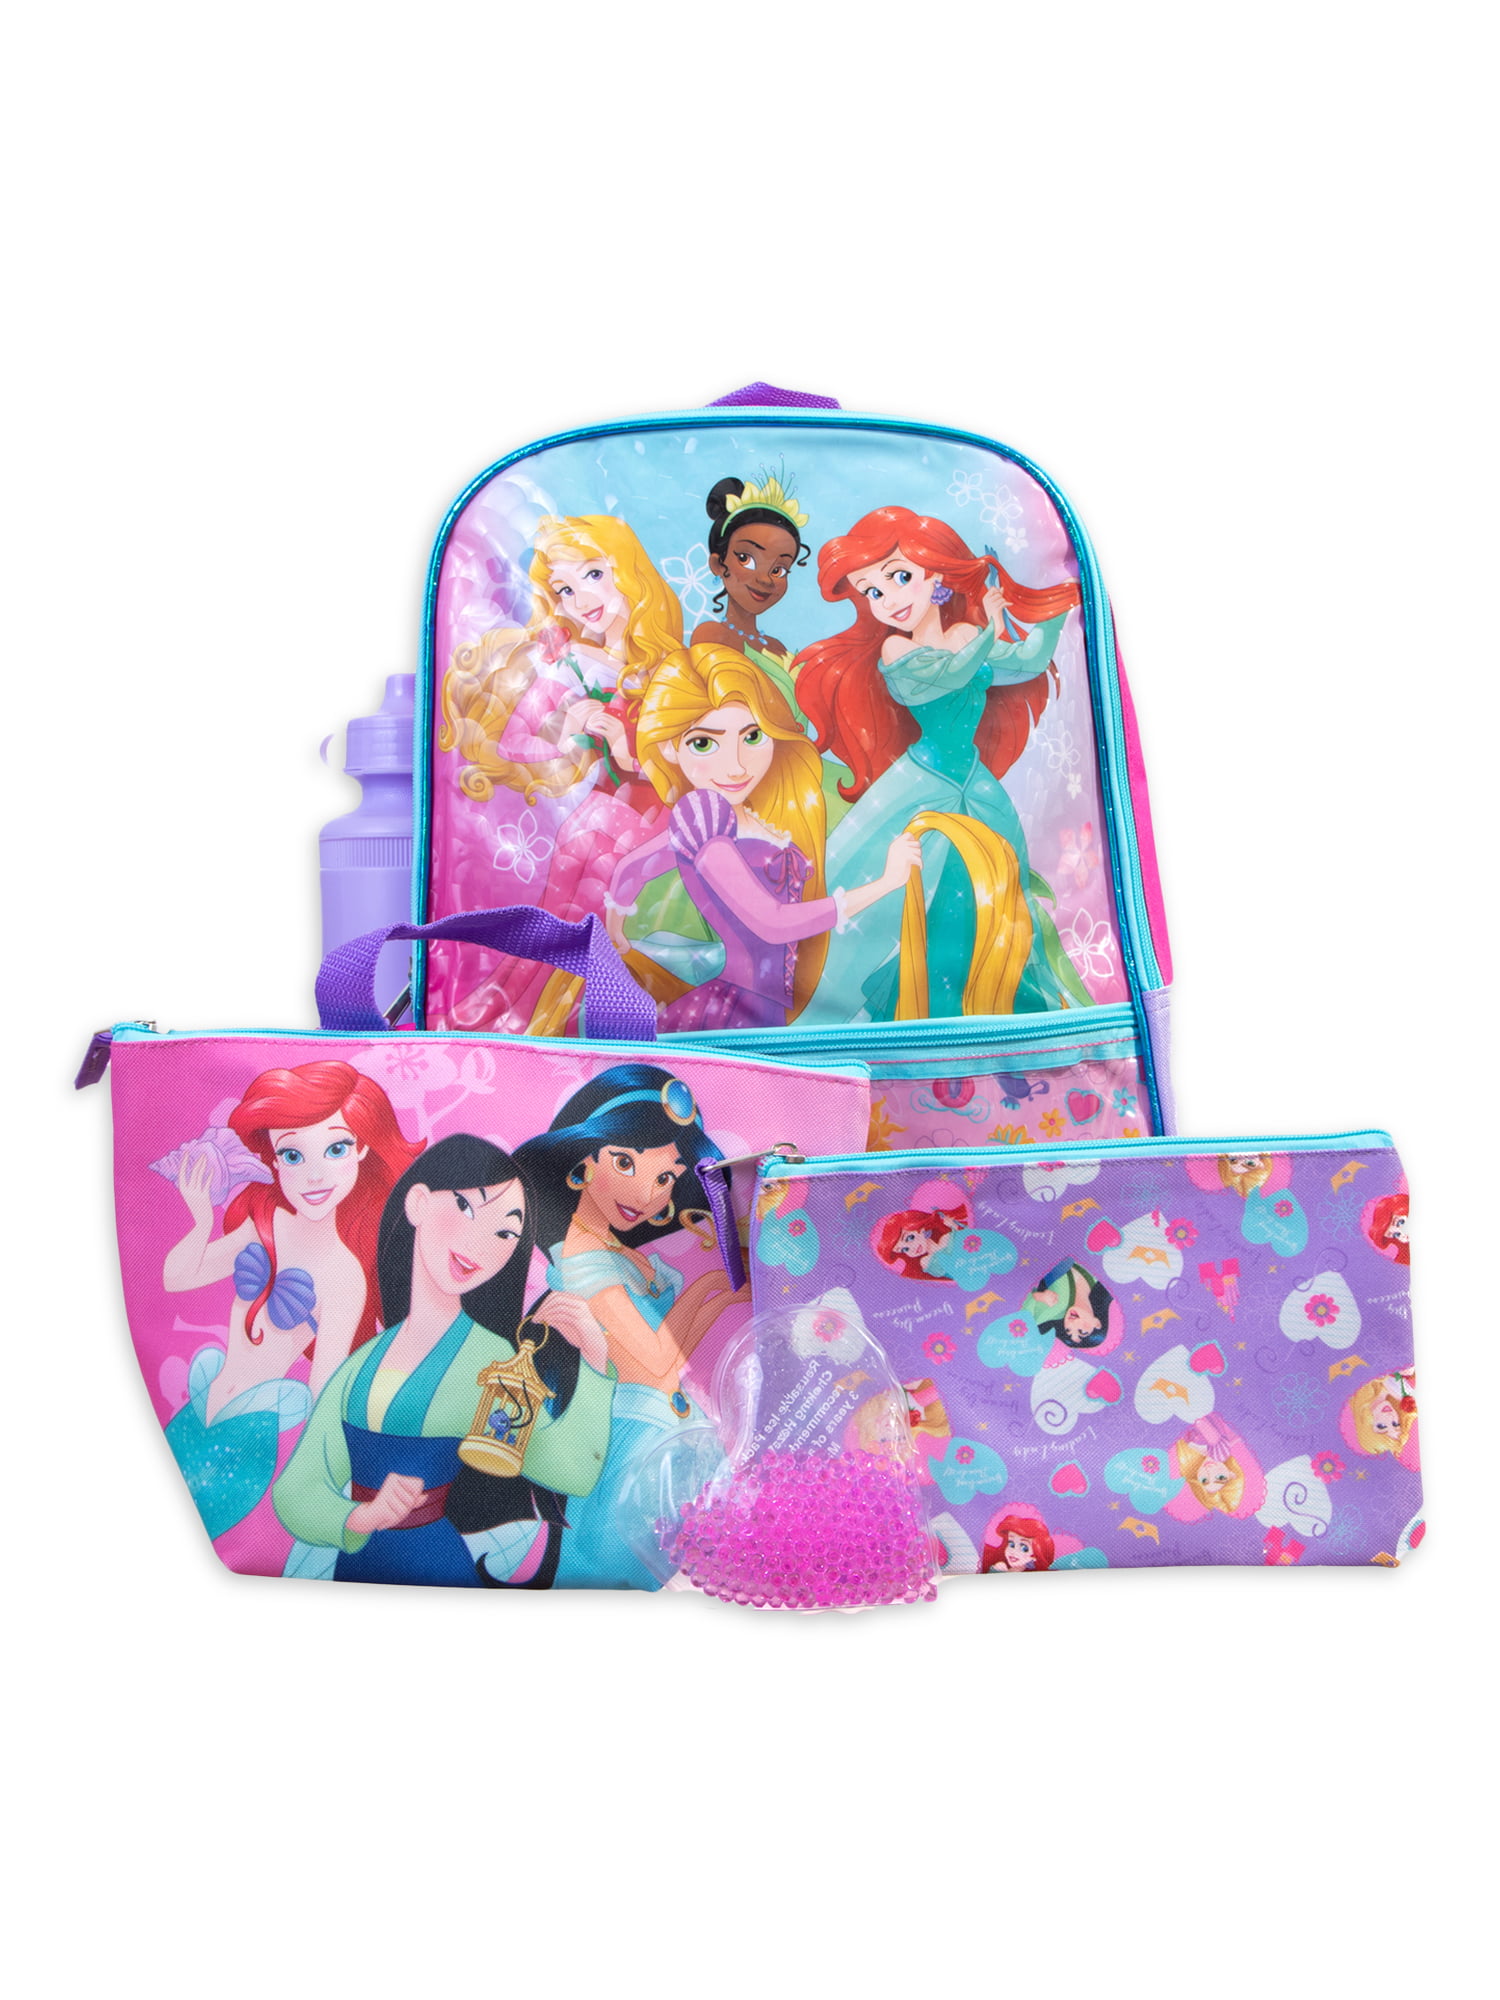 Princess 16 Full Size Cinderella Back Pack with Detachable Lunch Bag 